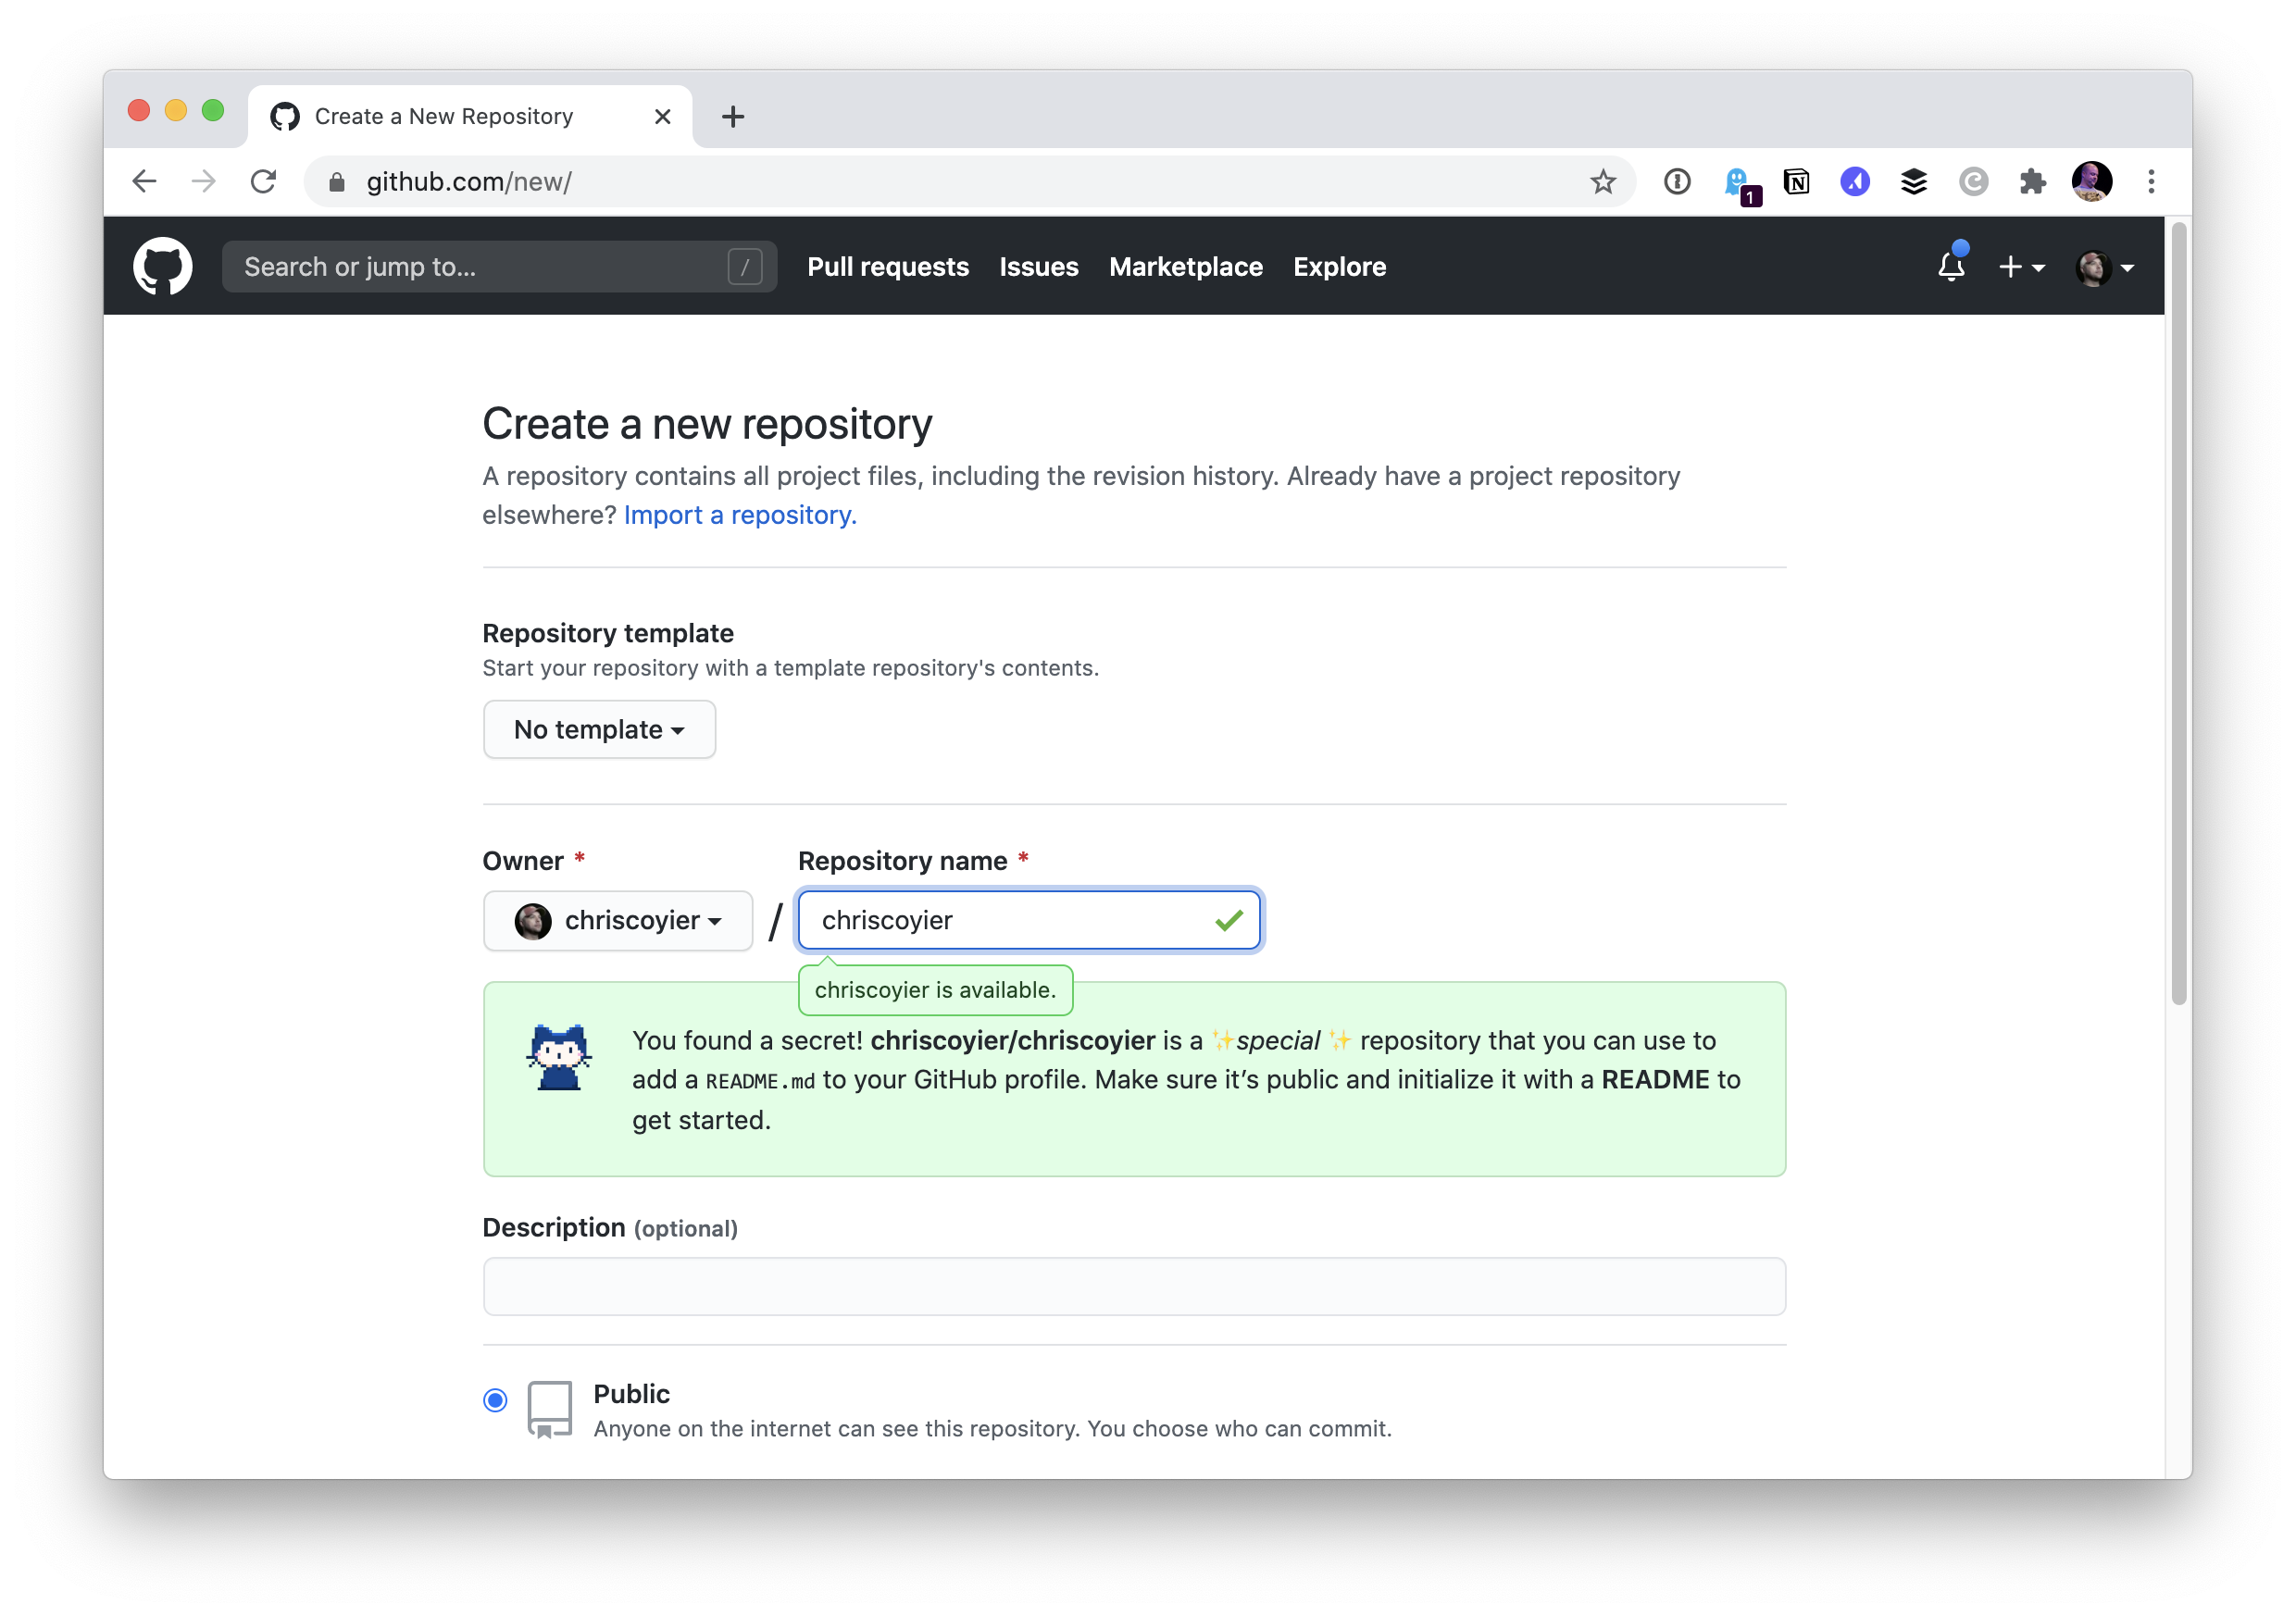 Screenshot showing the create new repo screen on GitHub. The repository name is set to chriscoyier.